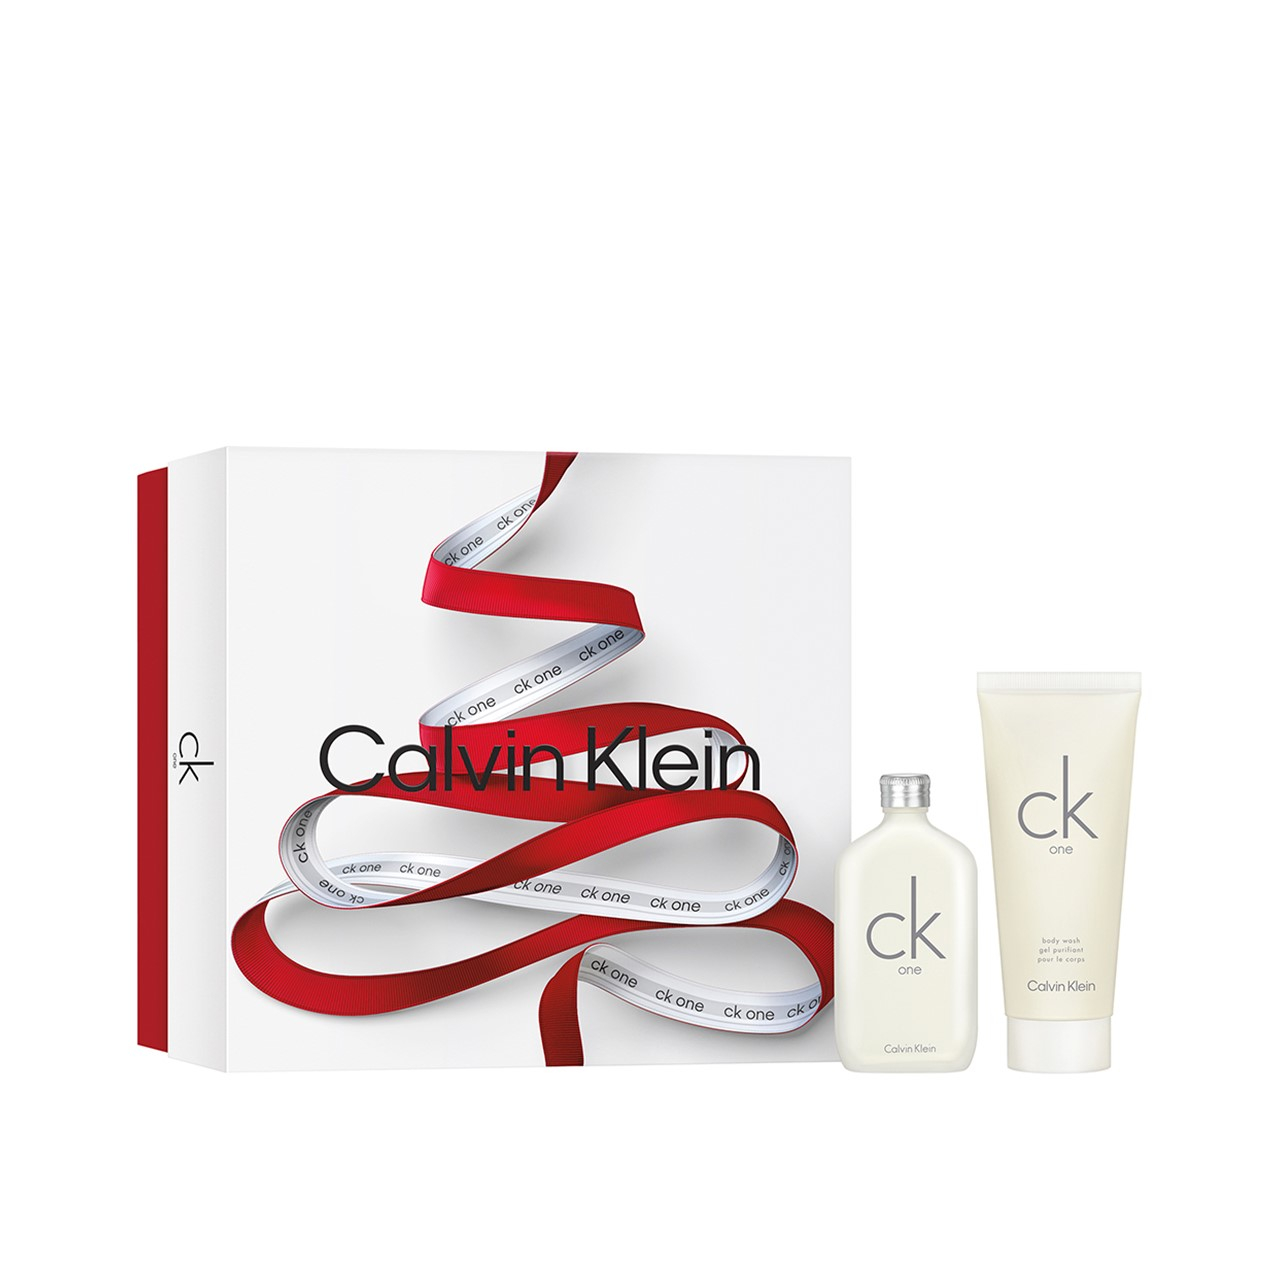 Holiday Gifts - Calvin Klein